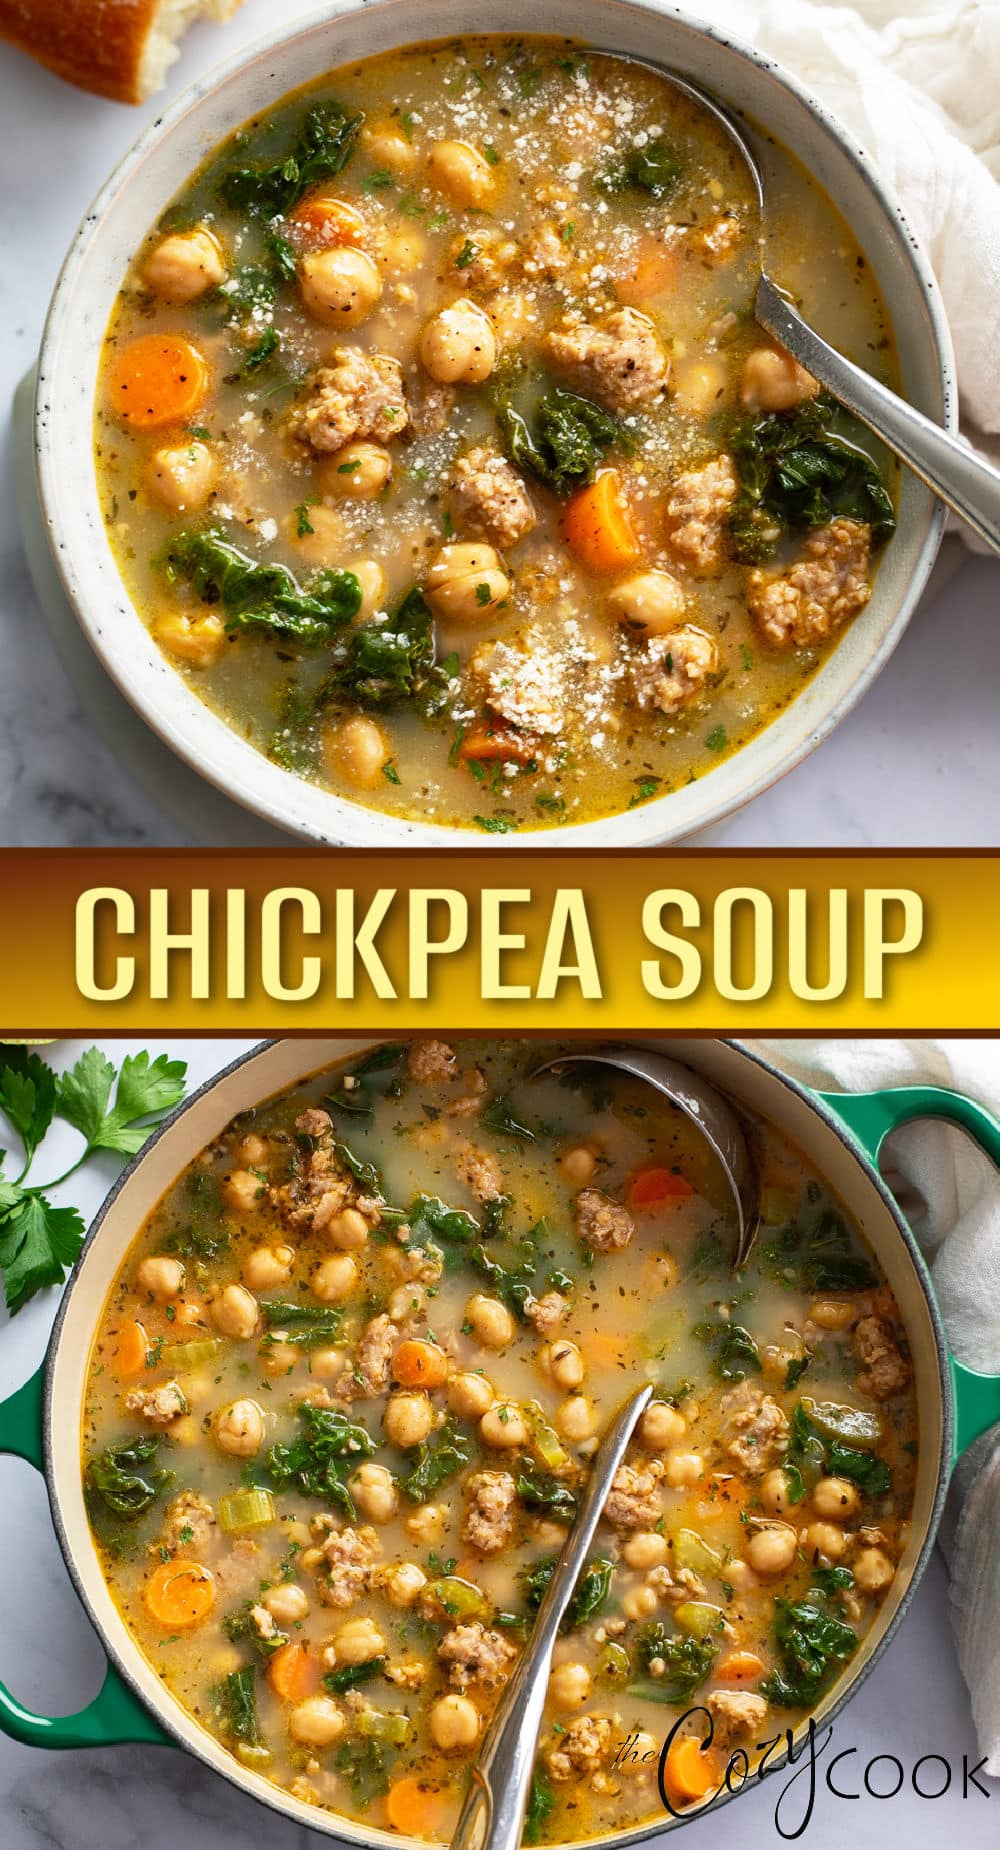 Chickpea Soup - The Cozy Cook